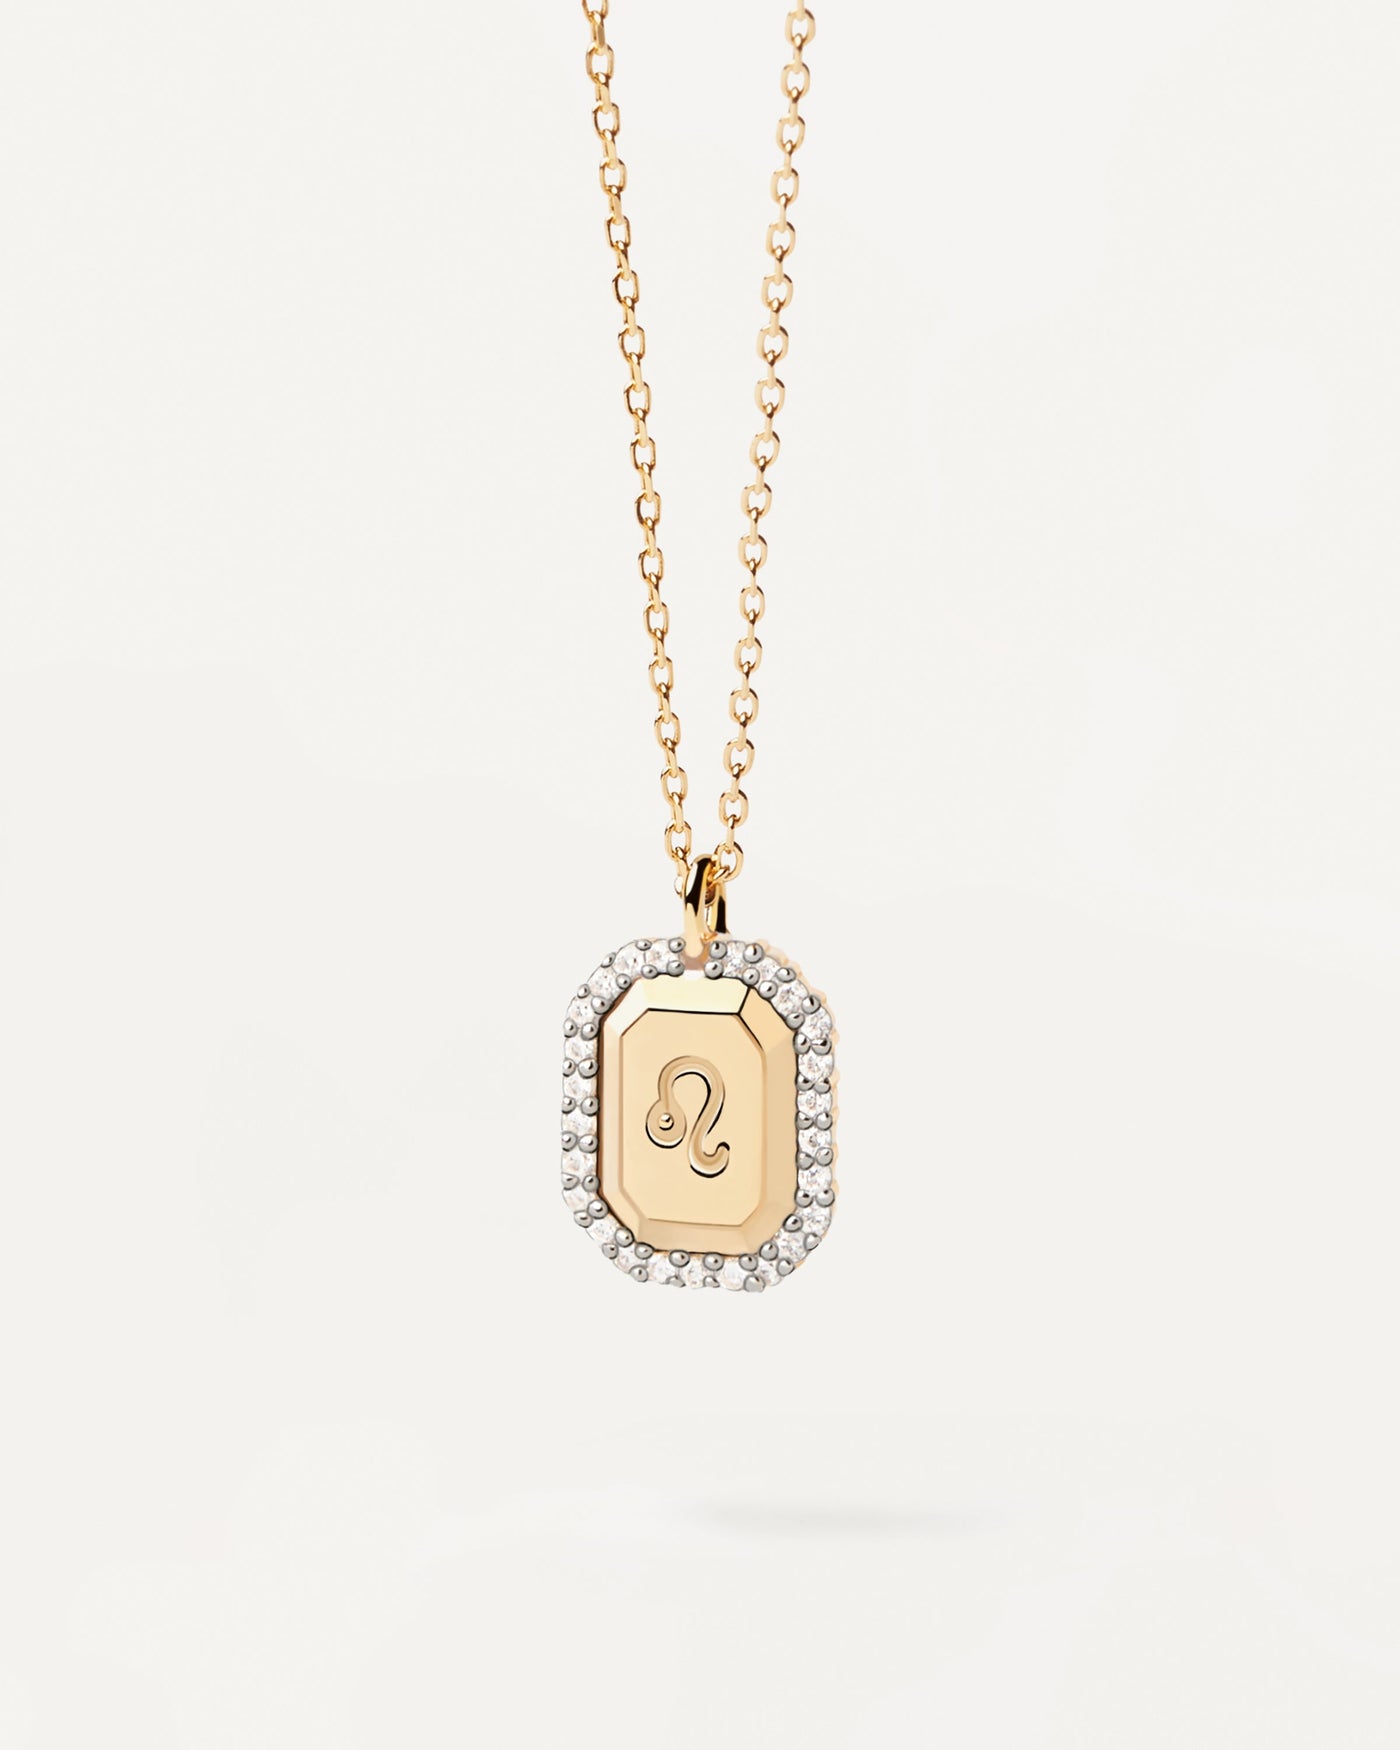 2023 Selection | Leo Necklace. Gold-plated silver necklace with Leo constellation symbol engraved. Get the latest arrival from PDPAOLA. Place your order safely and get this Best Seller. Free Shipping.